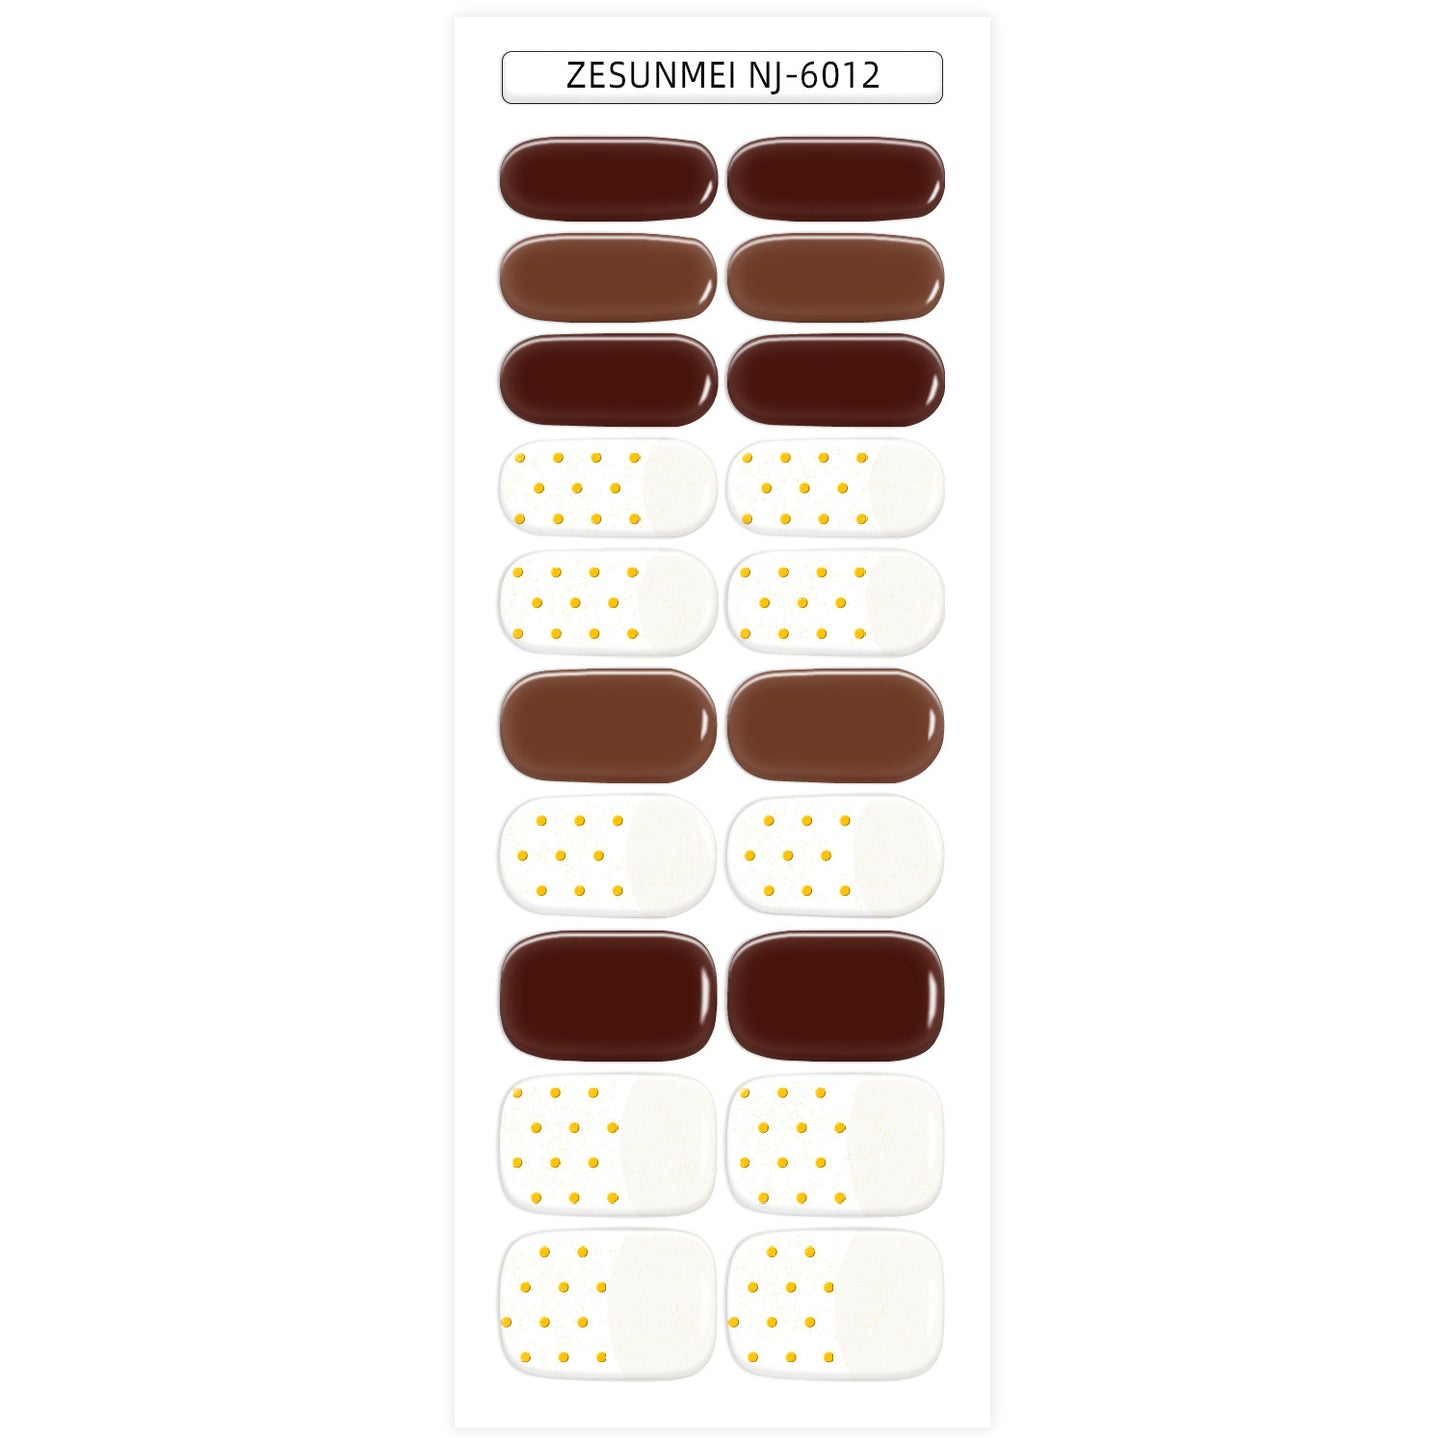 Semi-Cure Gel Nail Pads (20 pcs) - for any fixture, salon quality, long lasting, easy to apply and remove - includes 2 prep pads, nail file, and wooden stick!